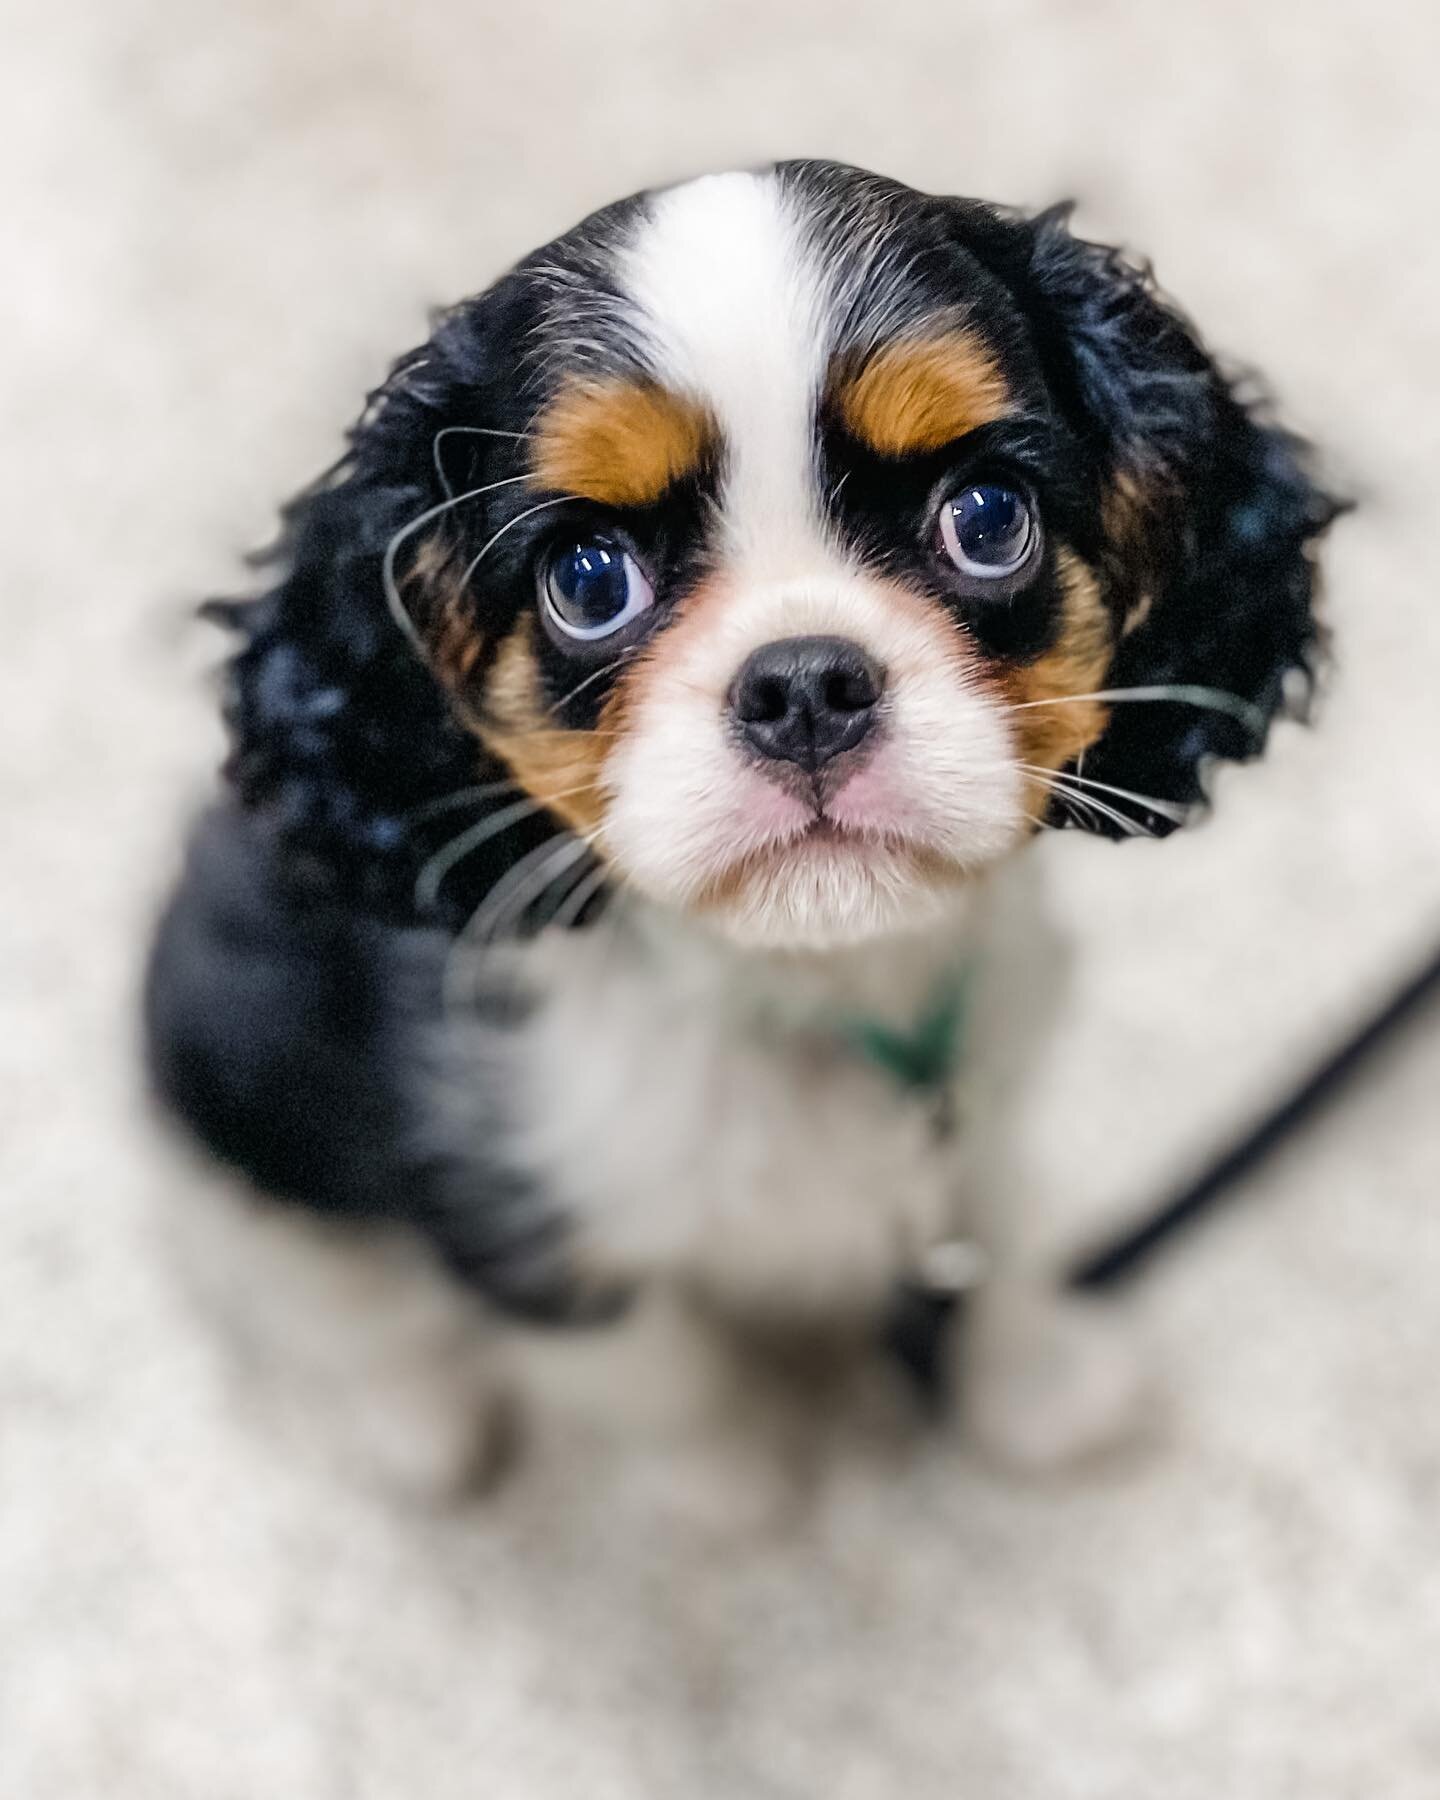 Archie! 💙
Archie is in my Tuesday night puppy class and I just love him! He has the funniest little personality and the biggest appetite I have ever seen on a little cavvy pup! Check out his face when he realises he has hit the jackpot with accessin